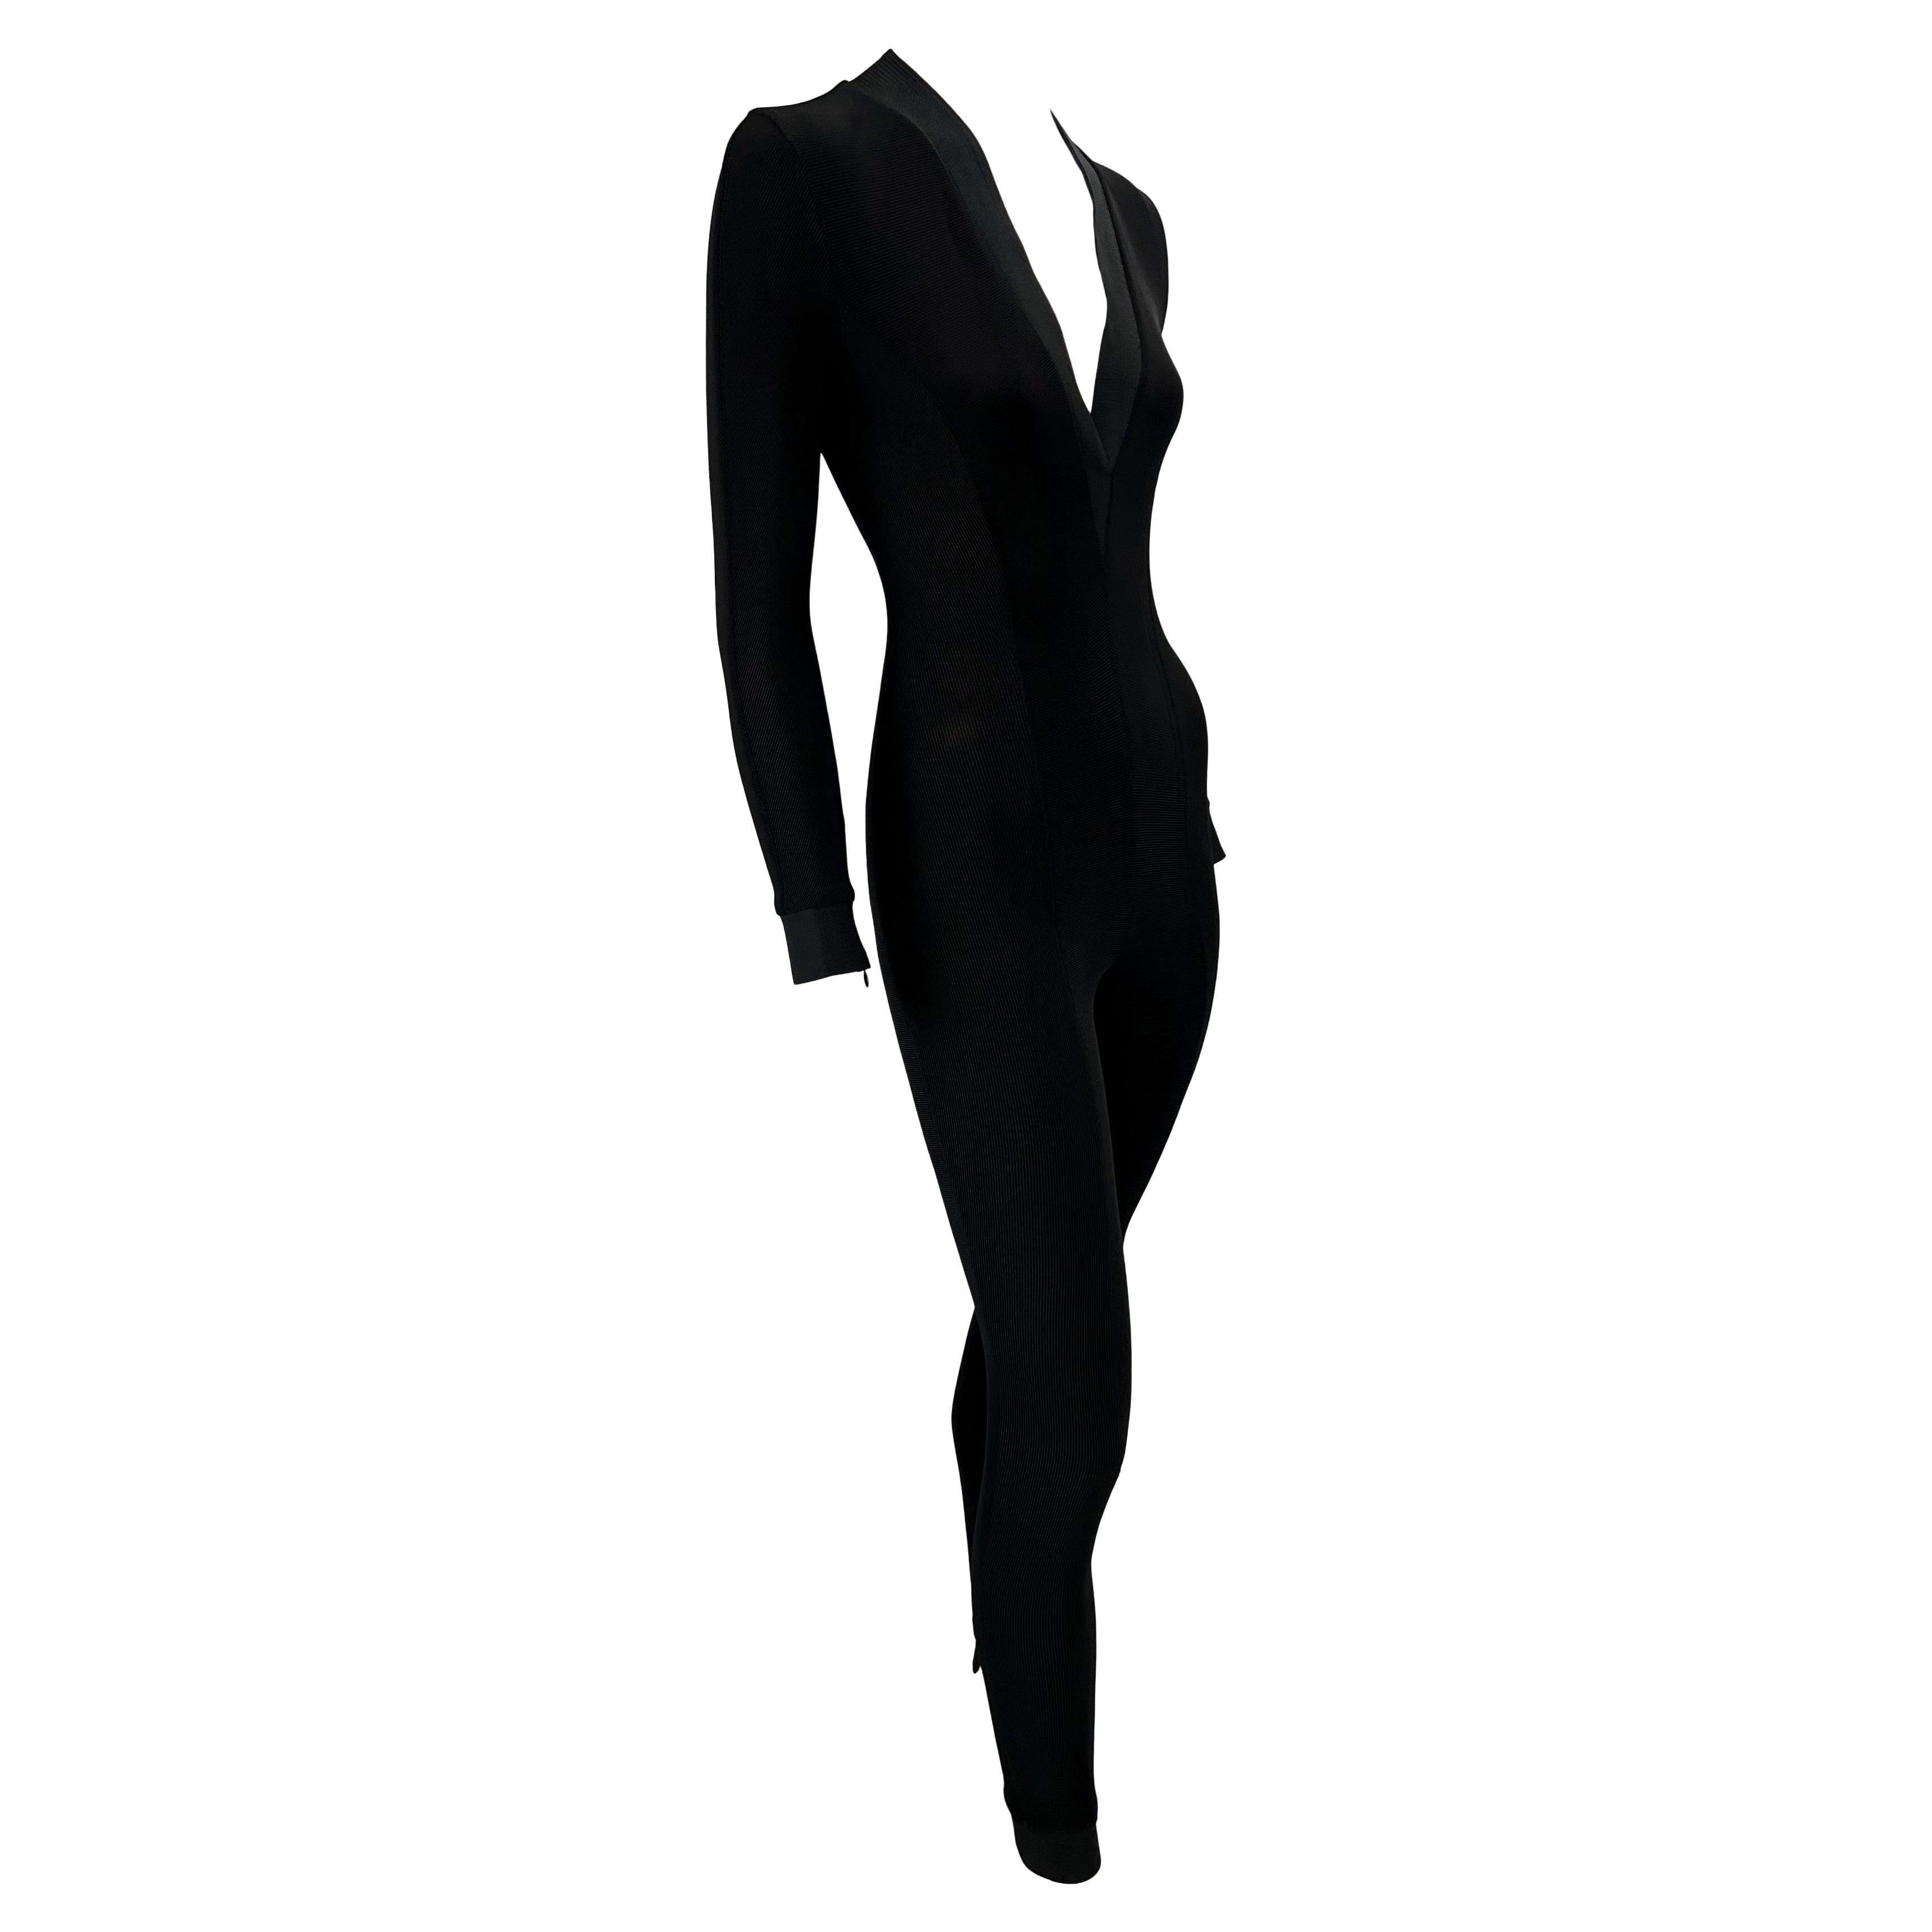 Women's S/S 1992 Gianni Versace Couture Black Ribbed Stretch Plunging Catsuit For Sale